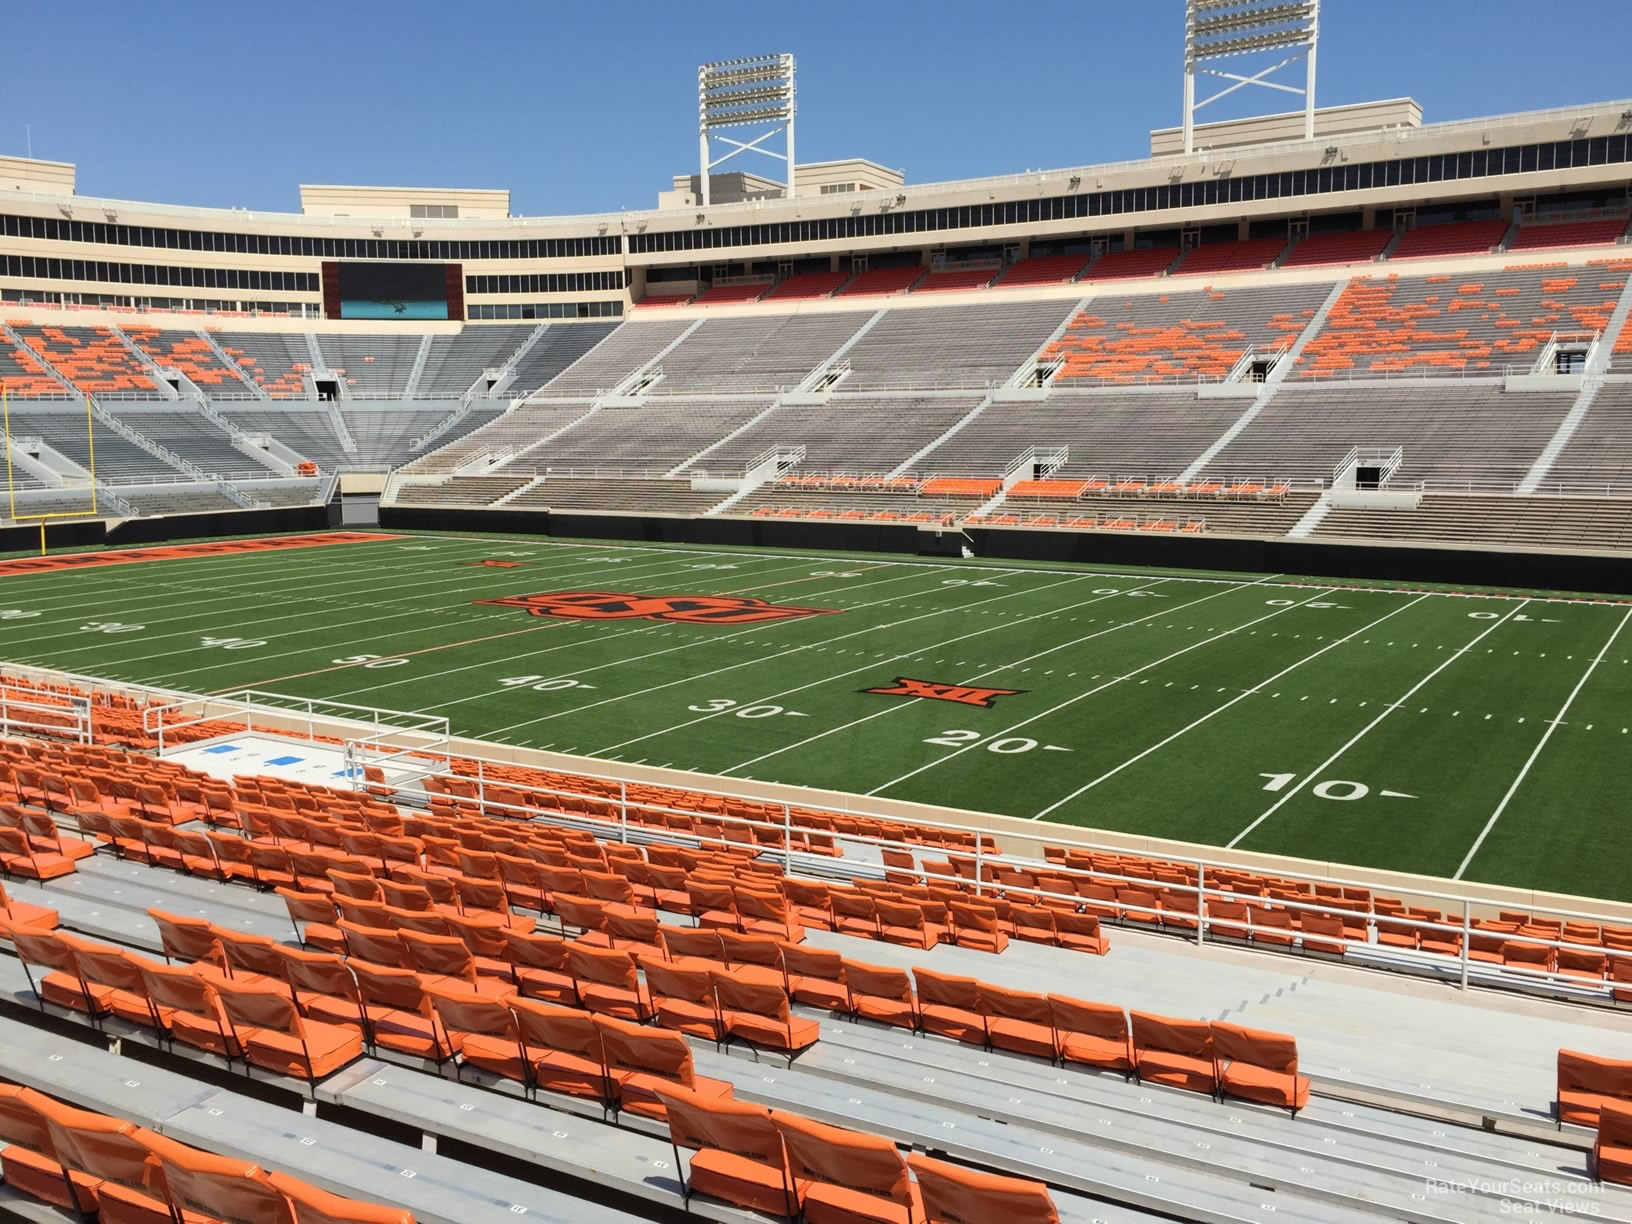 section 202, row 20 seat view  - boone pickens stadium